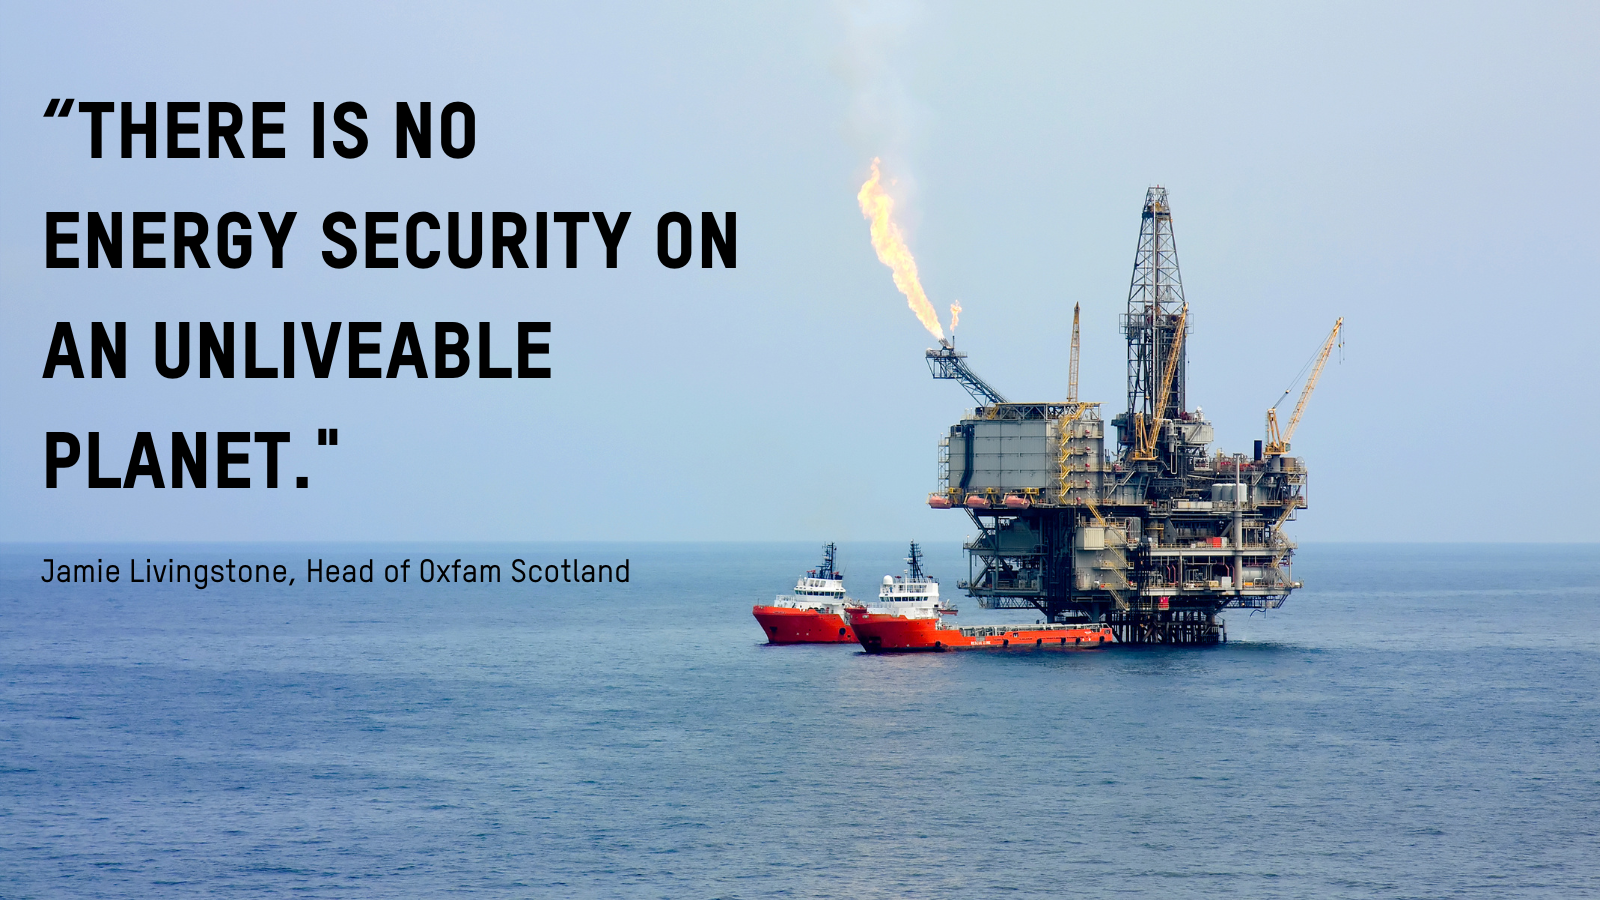 North Sea licences decision ‘short-sighted and selfish’ – Oxfam Scotland 